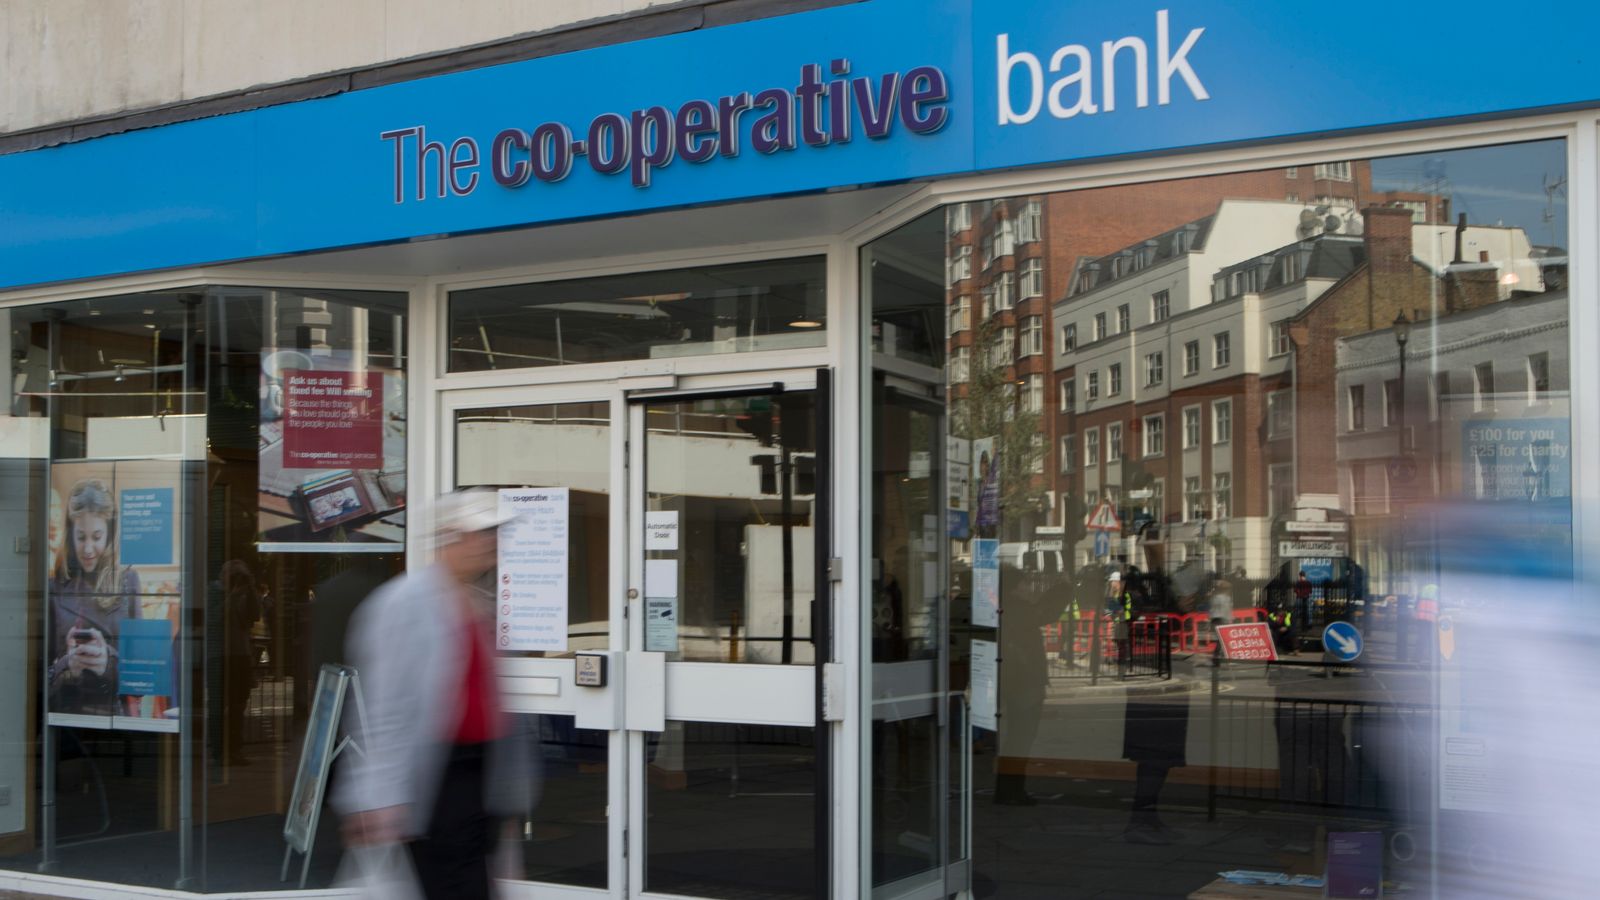 Shawbrook plots £3.5bn merger with Co-operative Bank